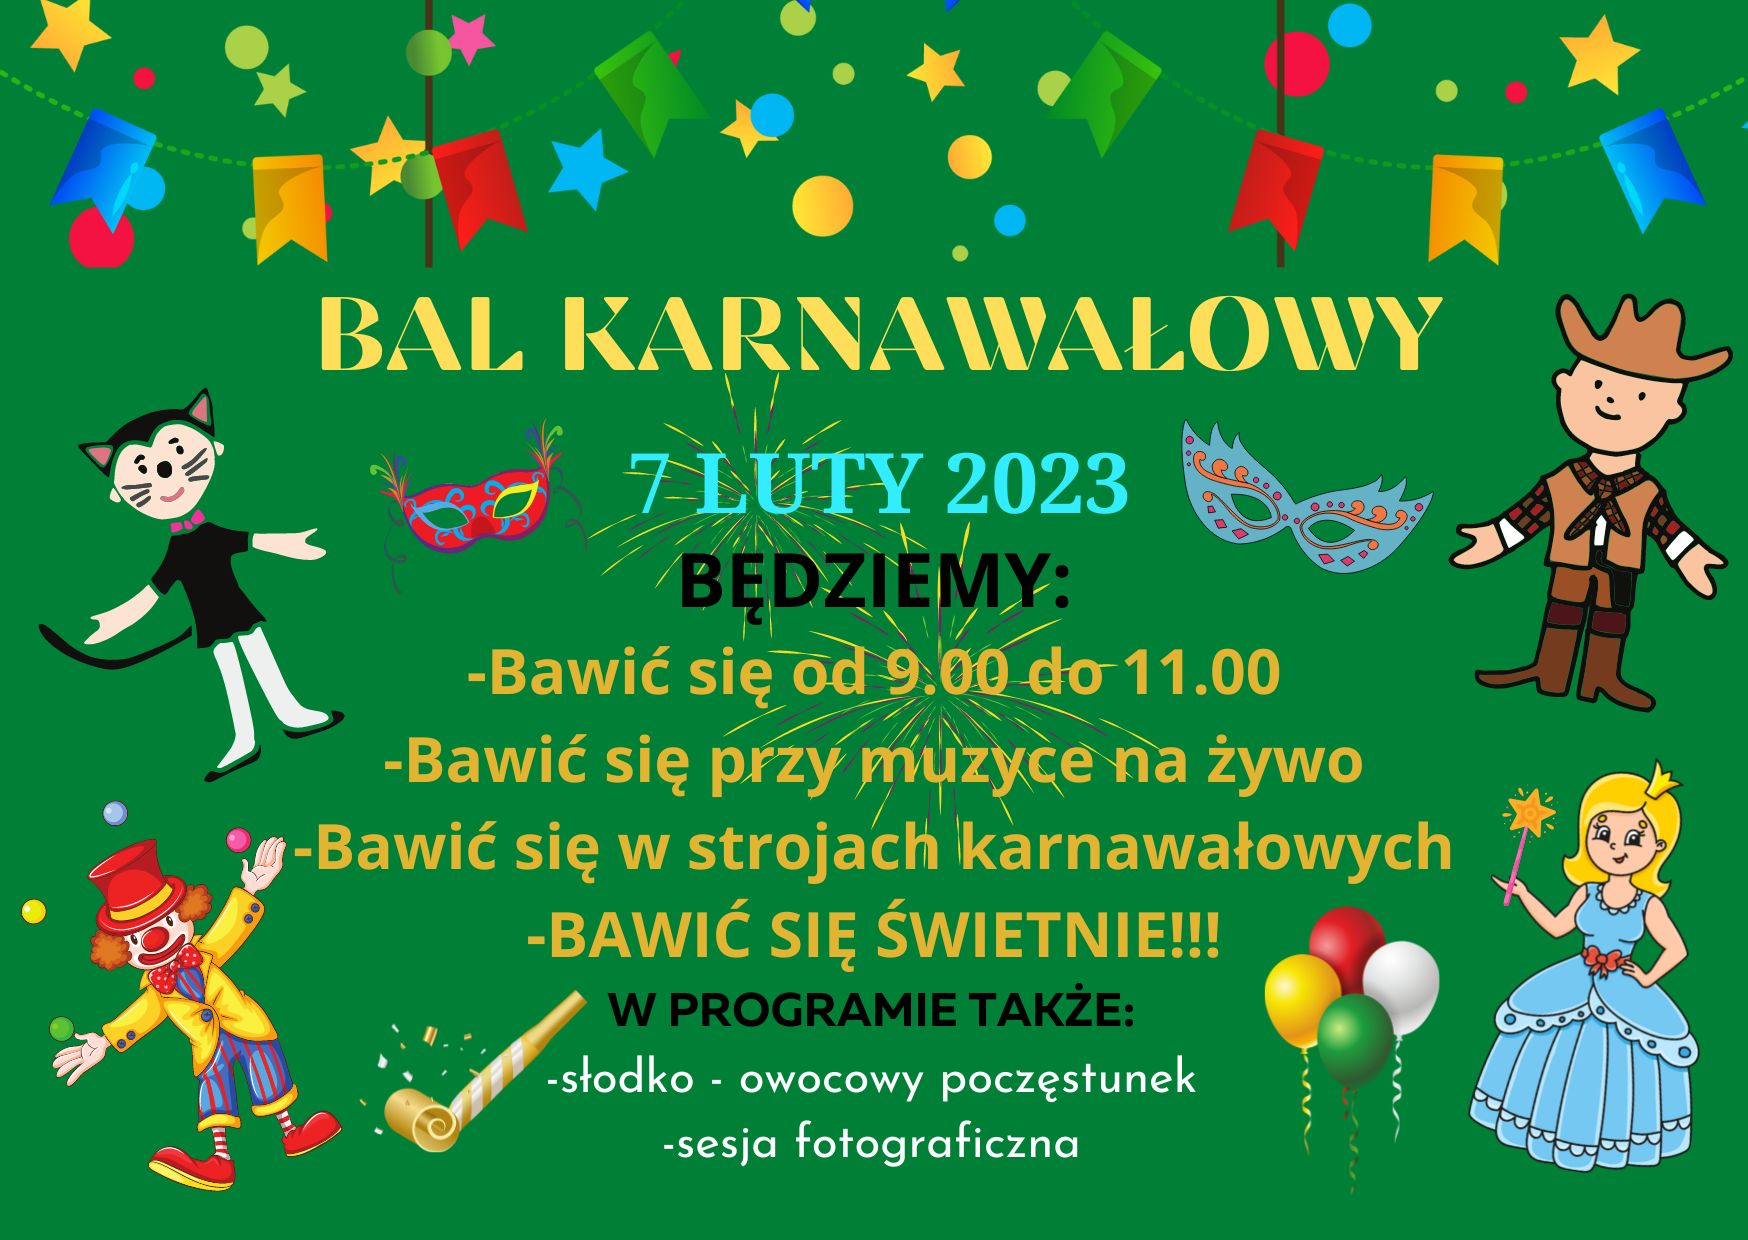 You are currently viewing BAL KARNAWAŁOWY 2023